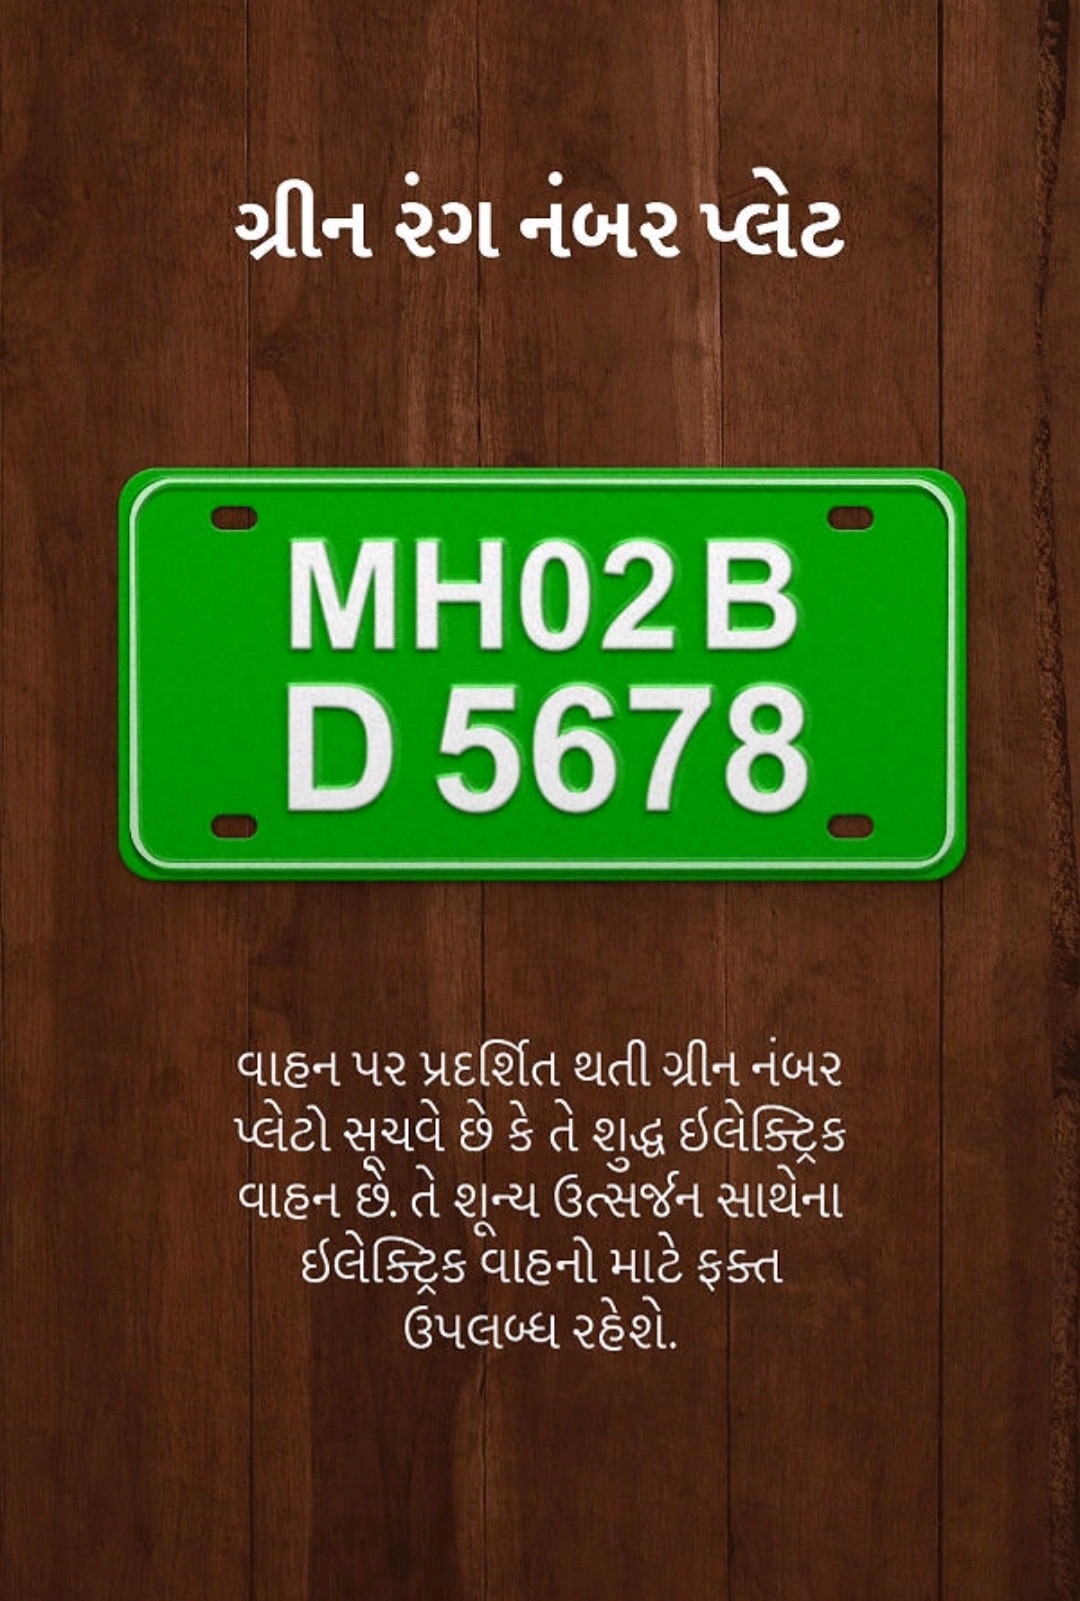 learn-about-the-different-types-of-number-plates-in-india-education